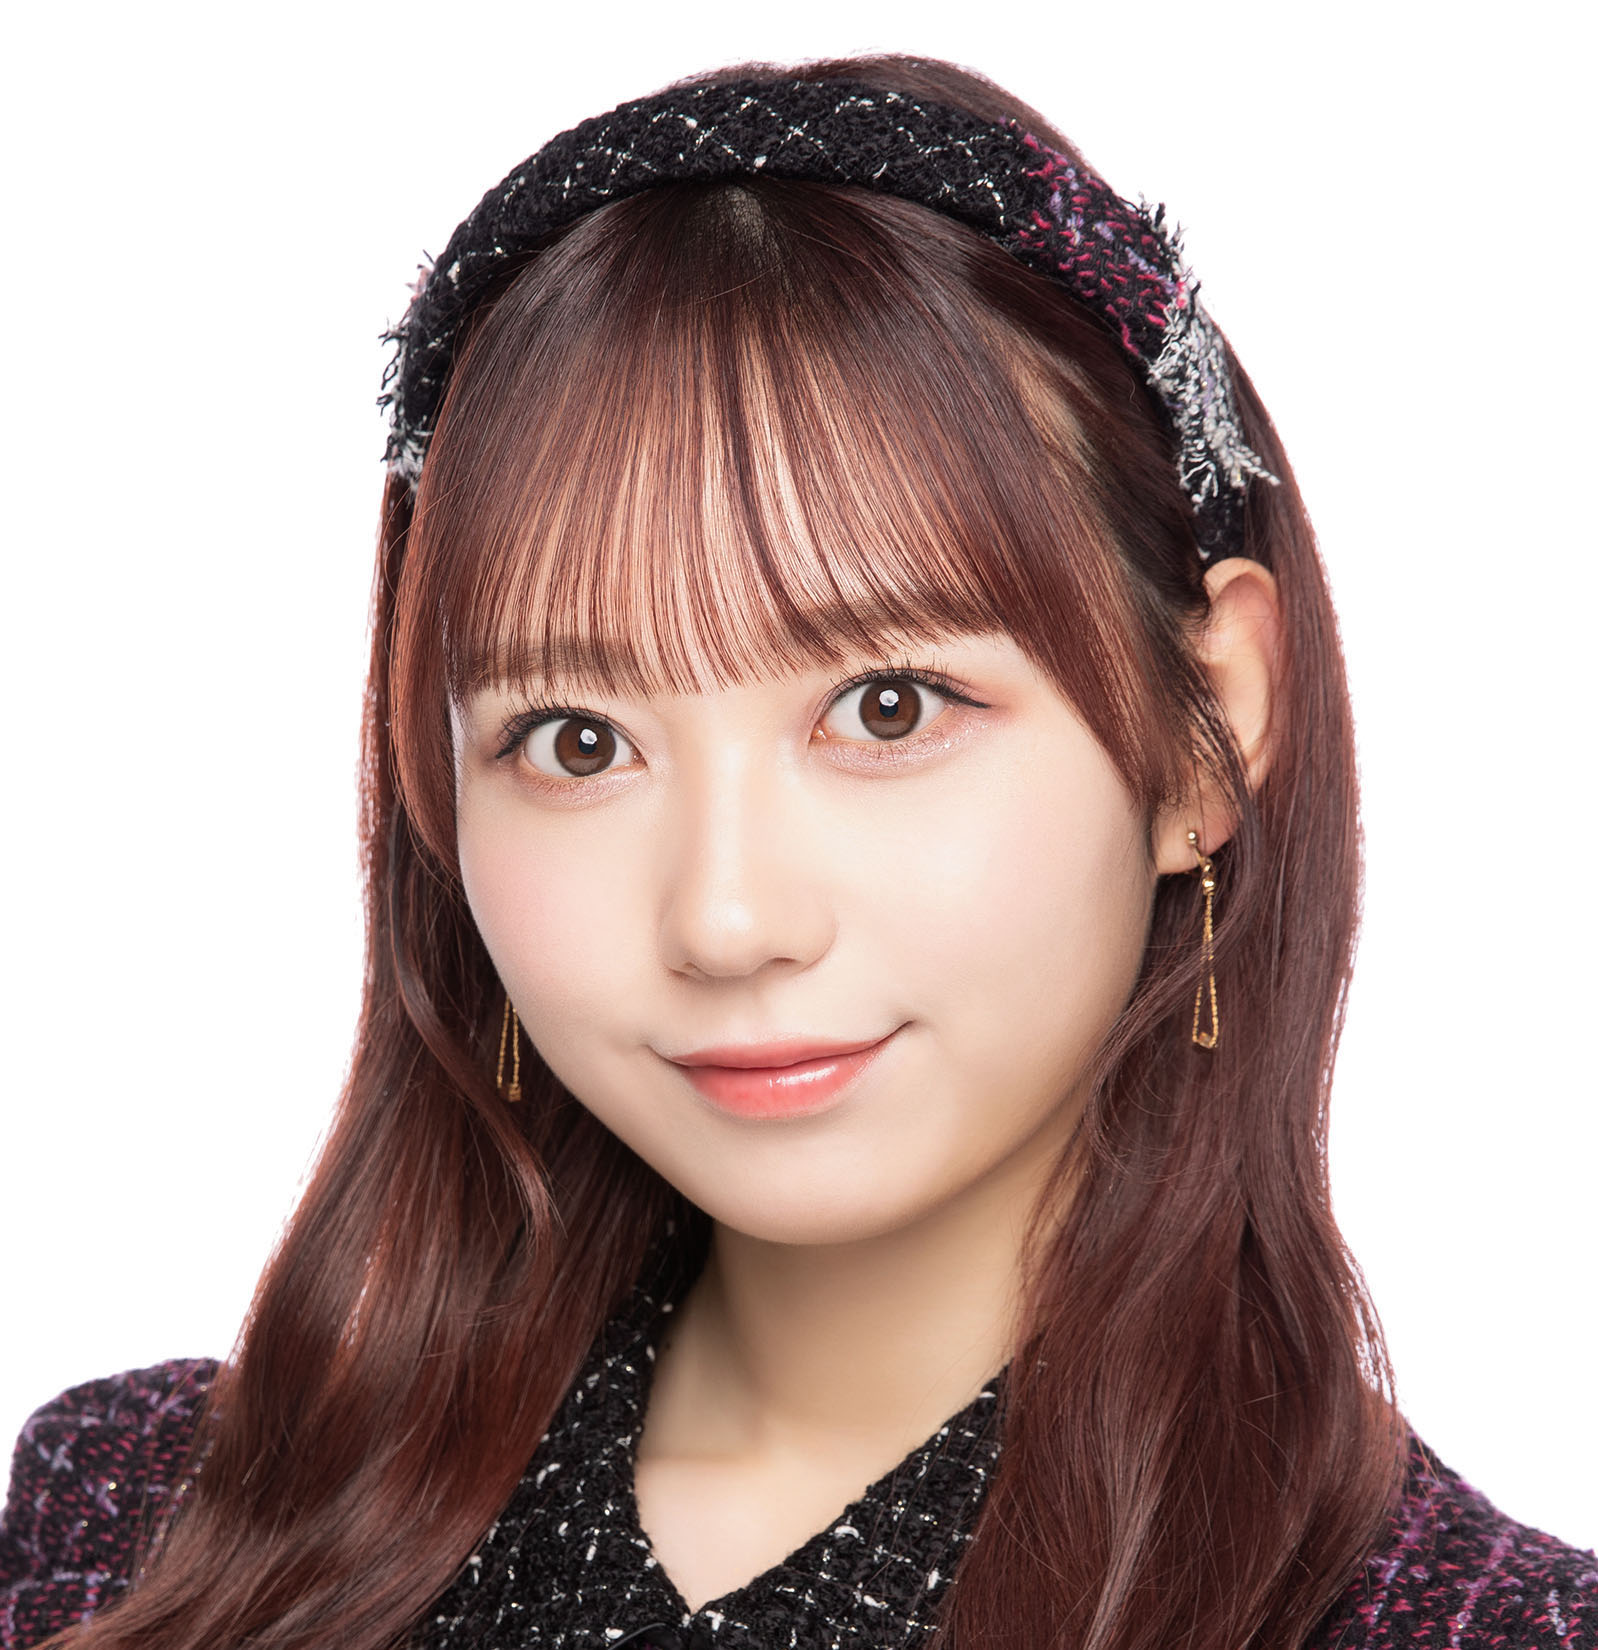 Official profile and news from AKB48